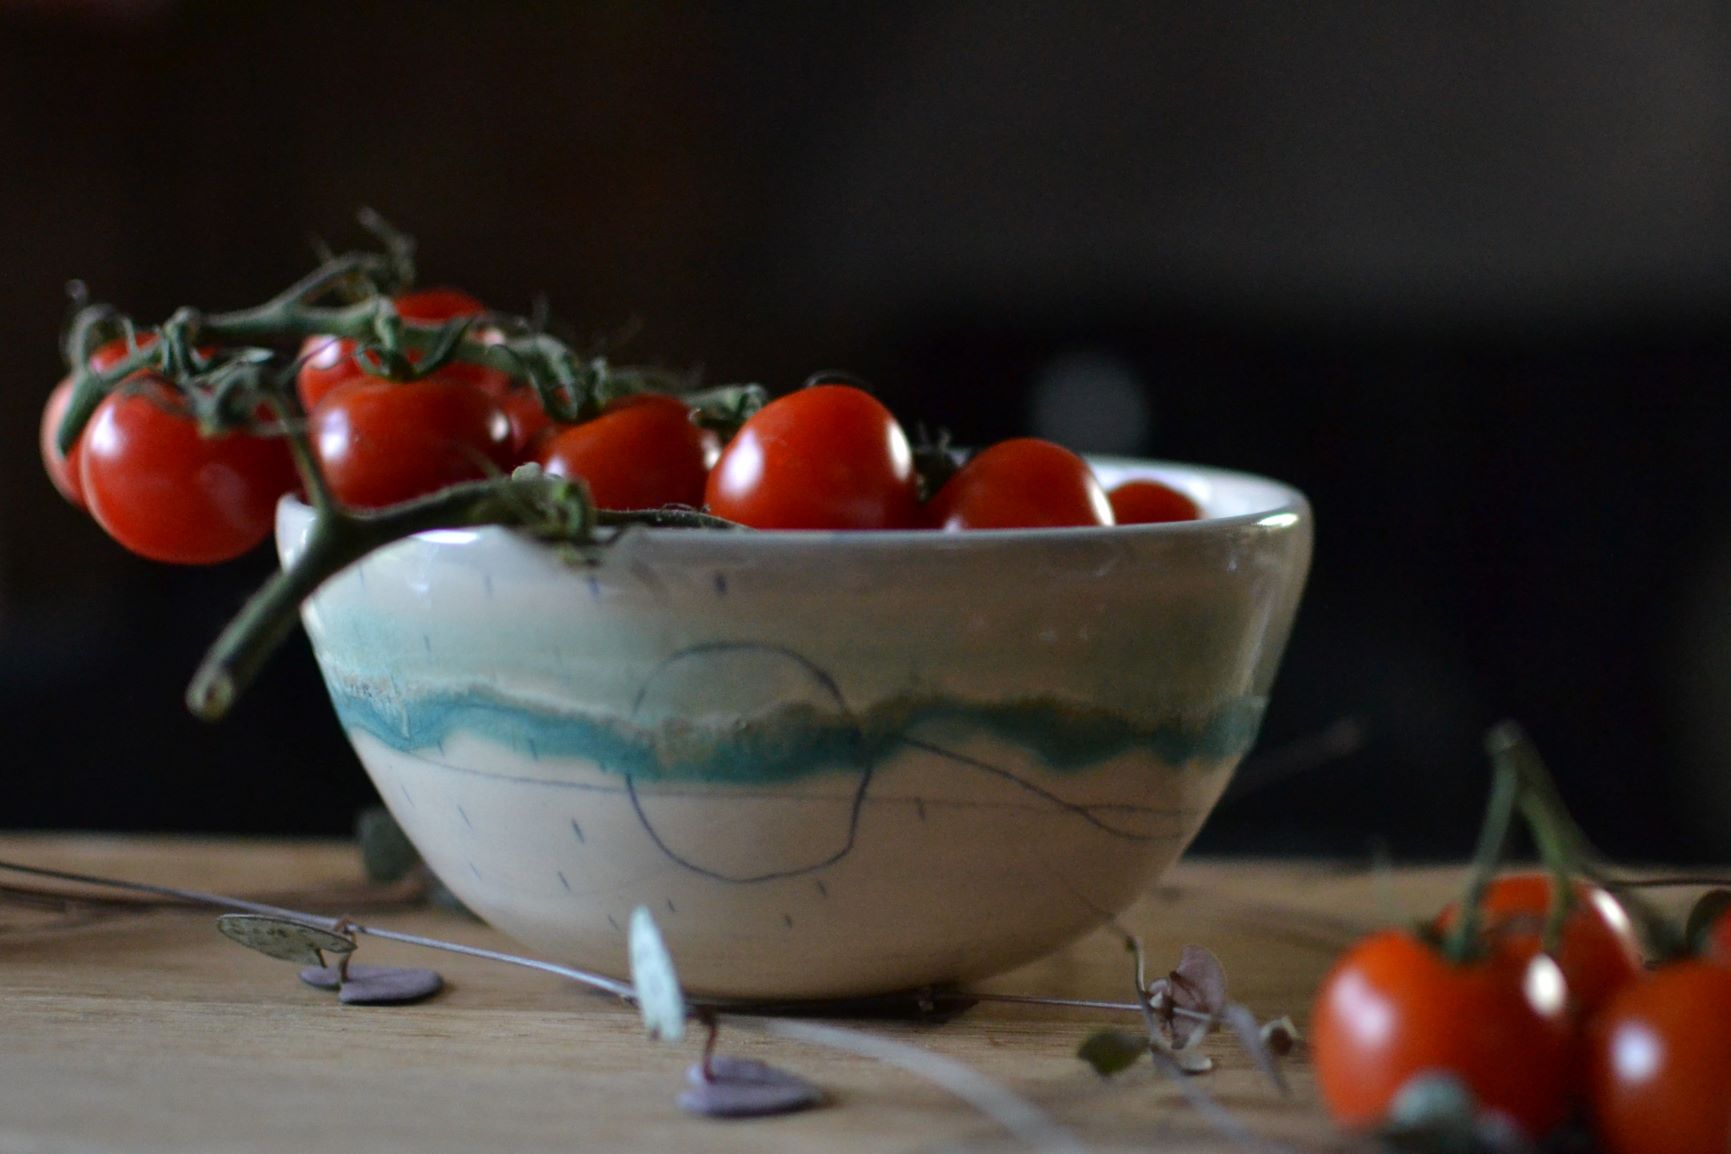 A handmade ceramic tapas bowl full to the brim with tomatoes on the vine.